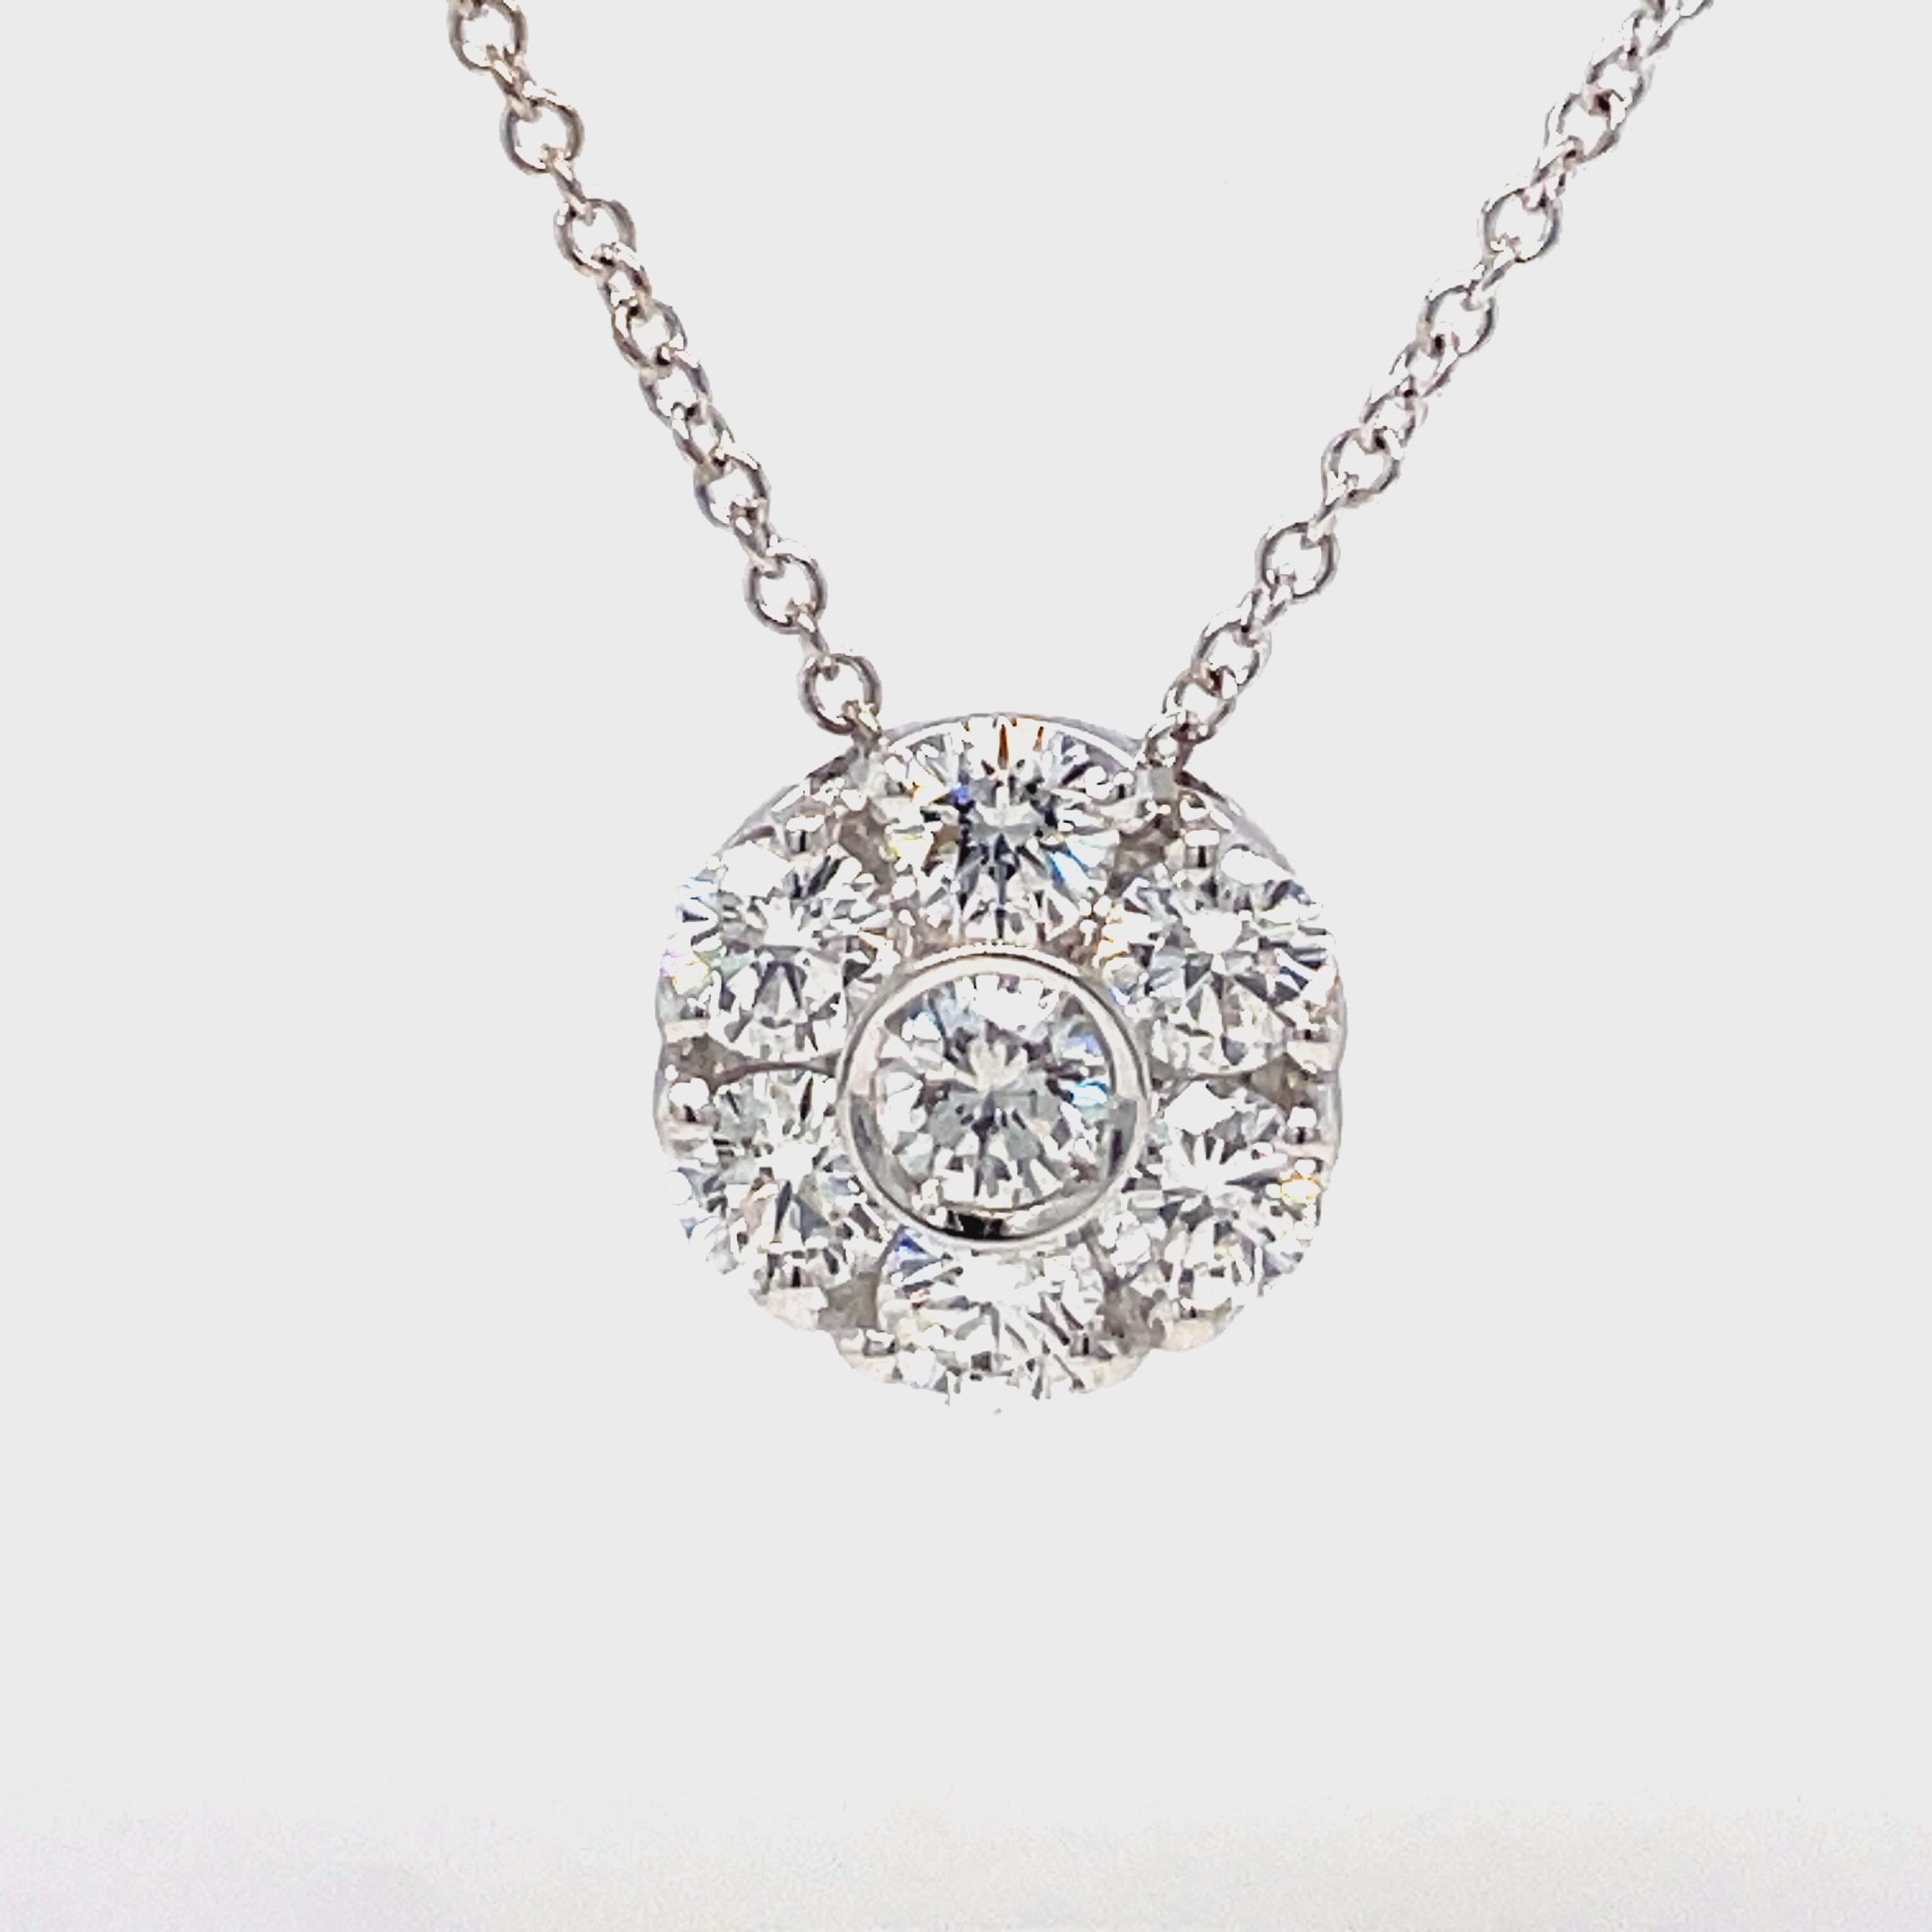 Introducing our exquisite 18k Flower Diamond Pendant Necklace. Crafted with a stunning flower motif pendant, adorned with seven round diamonds totaling 1.60 cts. Made with 18 white gold and paired with an 18' white gold chain, secured with a lobster clasp. Enhance your style with this timeless and elegant piece.